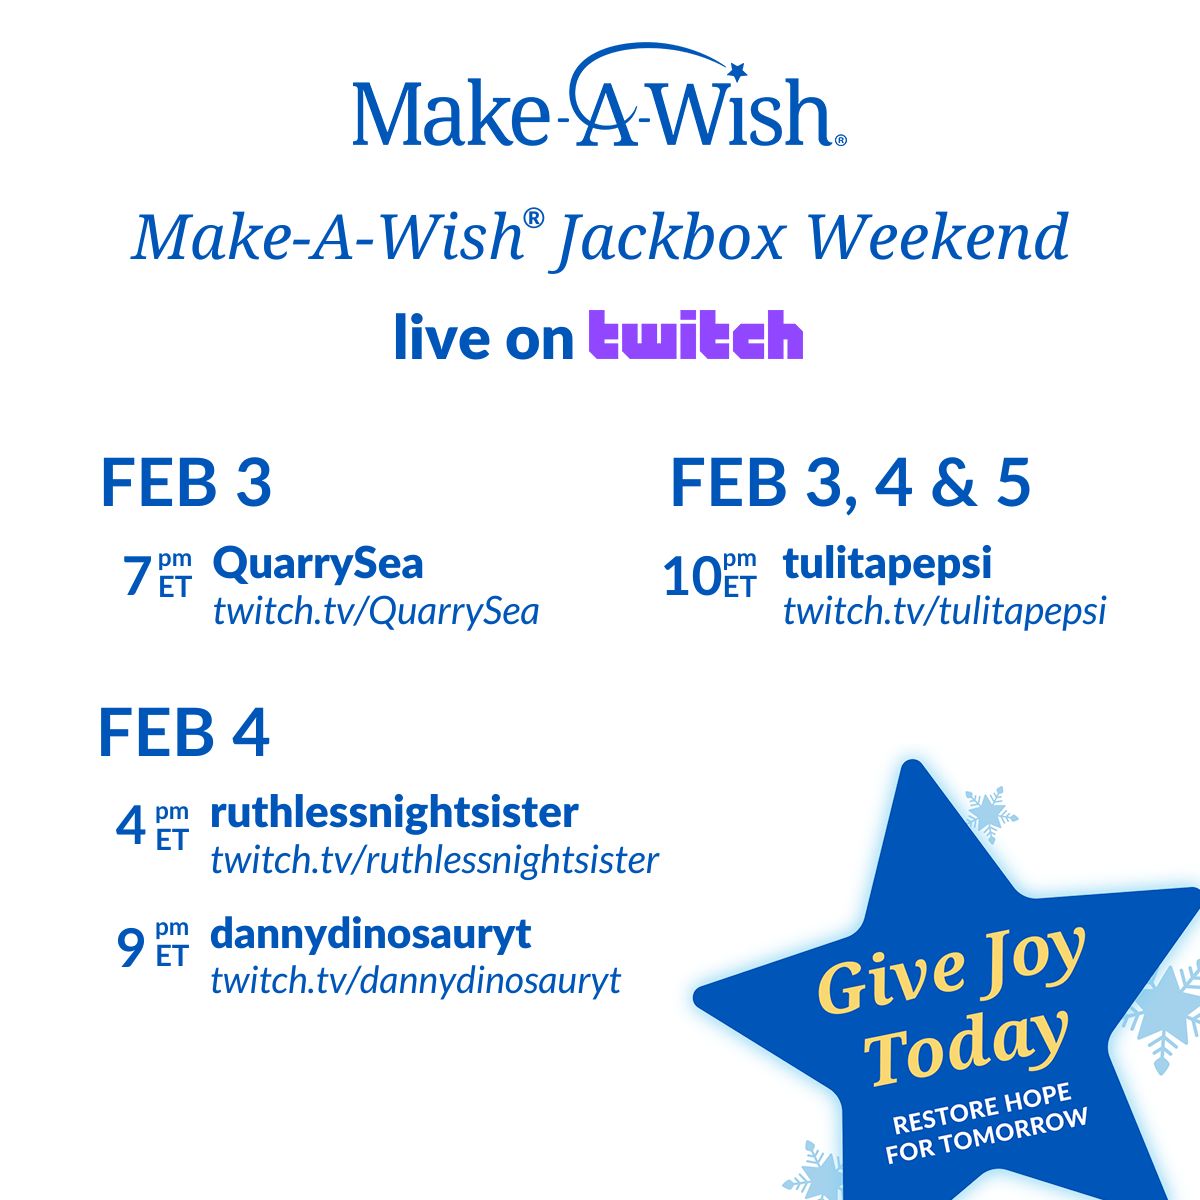 Join us for Jackbox Weekend starting Friday! Our awesome creators -  @RuthlessNS_,  @tulitapepsittv, and more -  will be playing @jackboxgames and hosting giveaways all weekend! Tune in to the fun and make more wishes come true! #StreamForWishes @tiltify